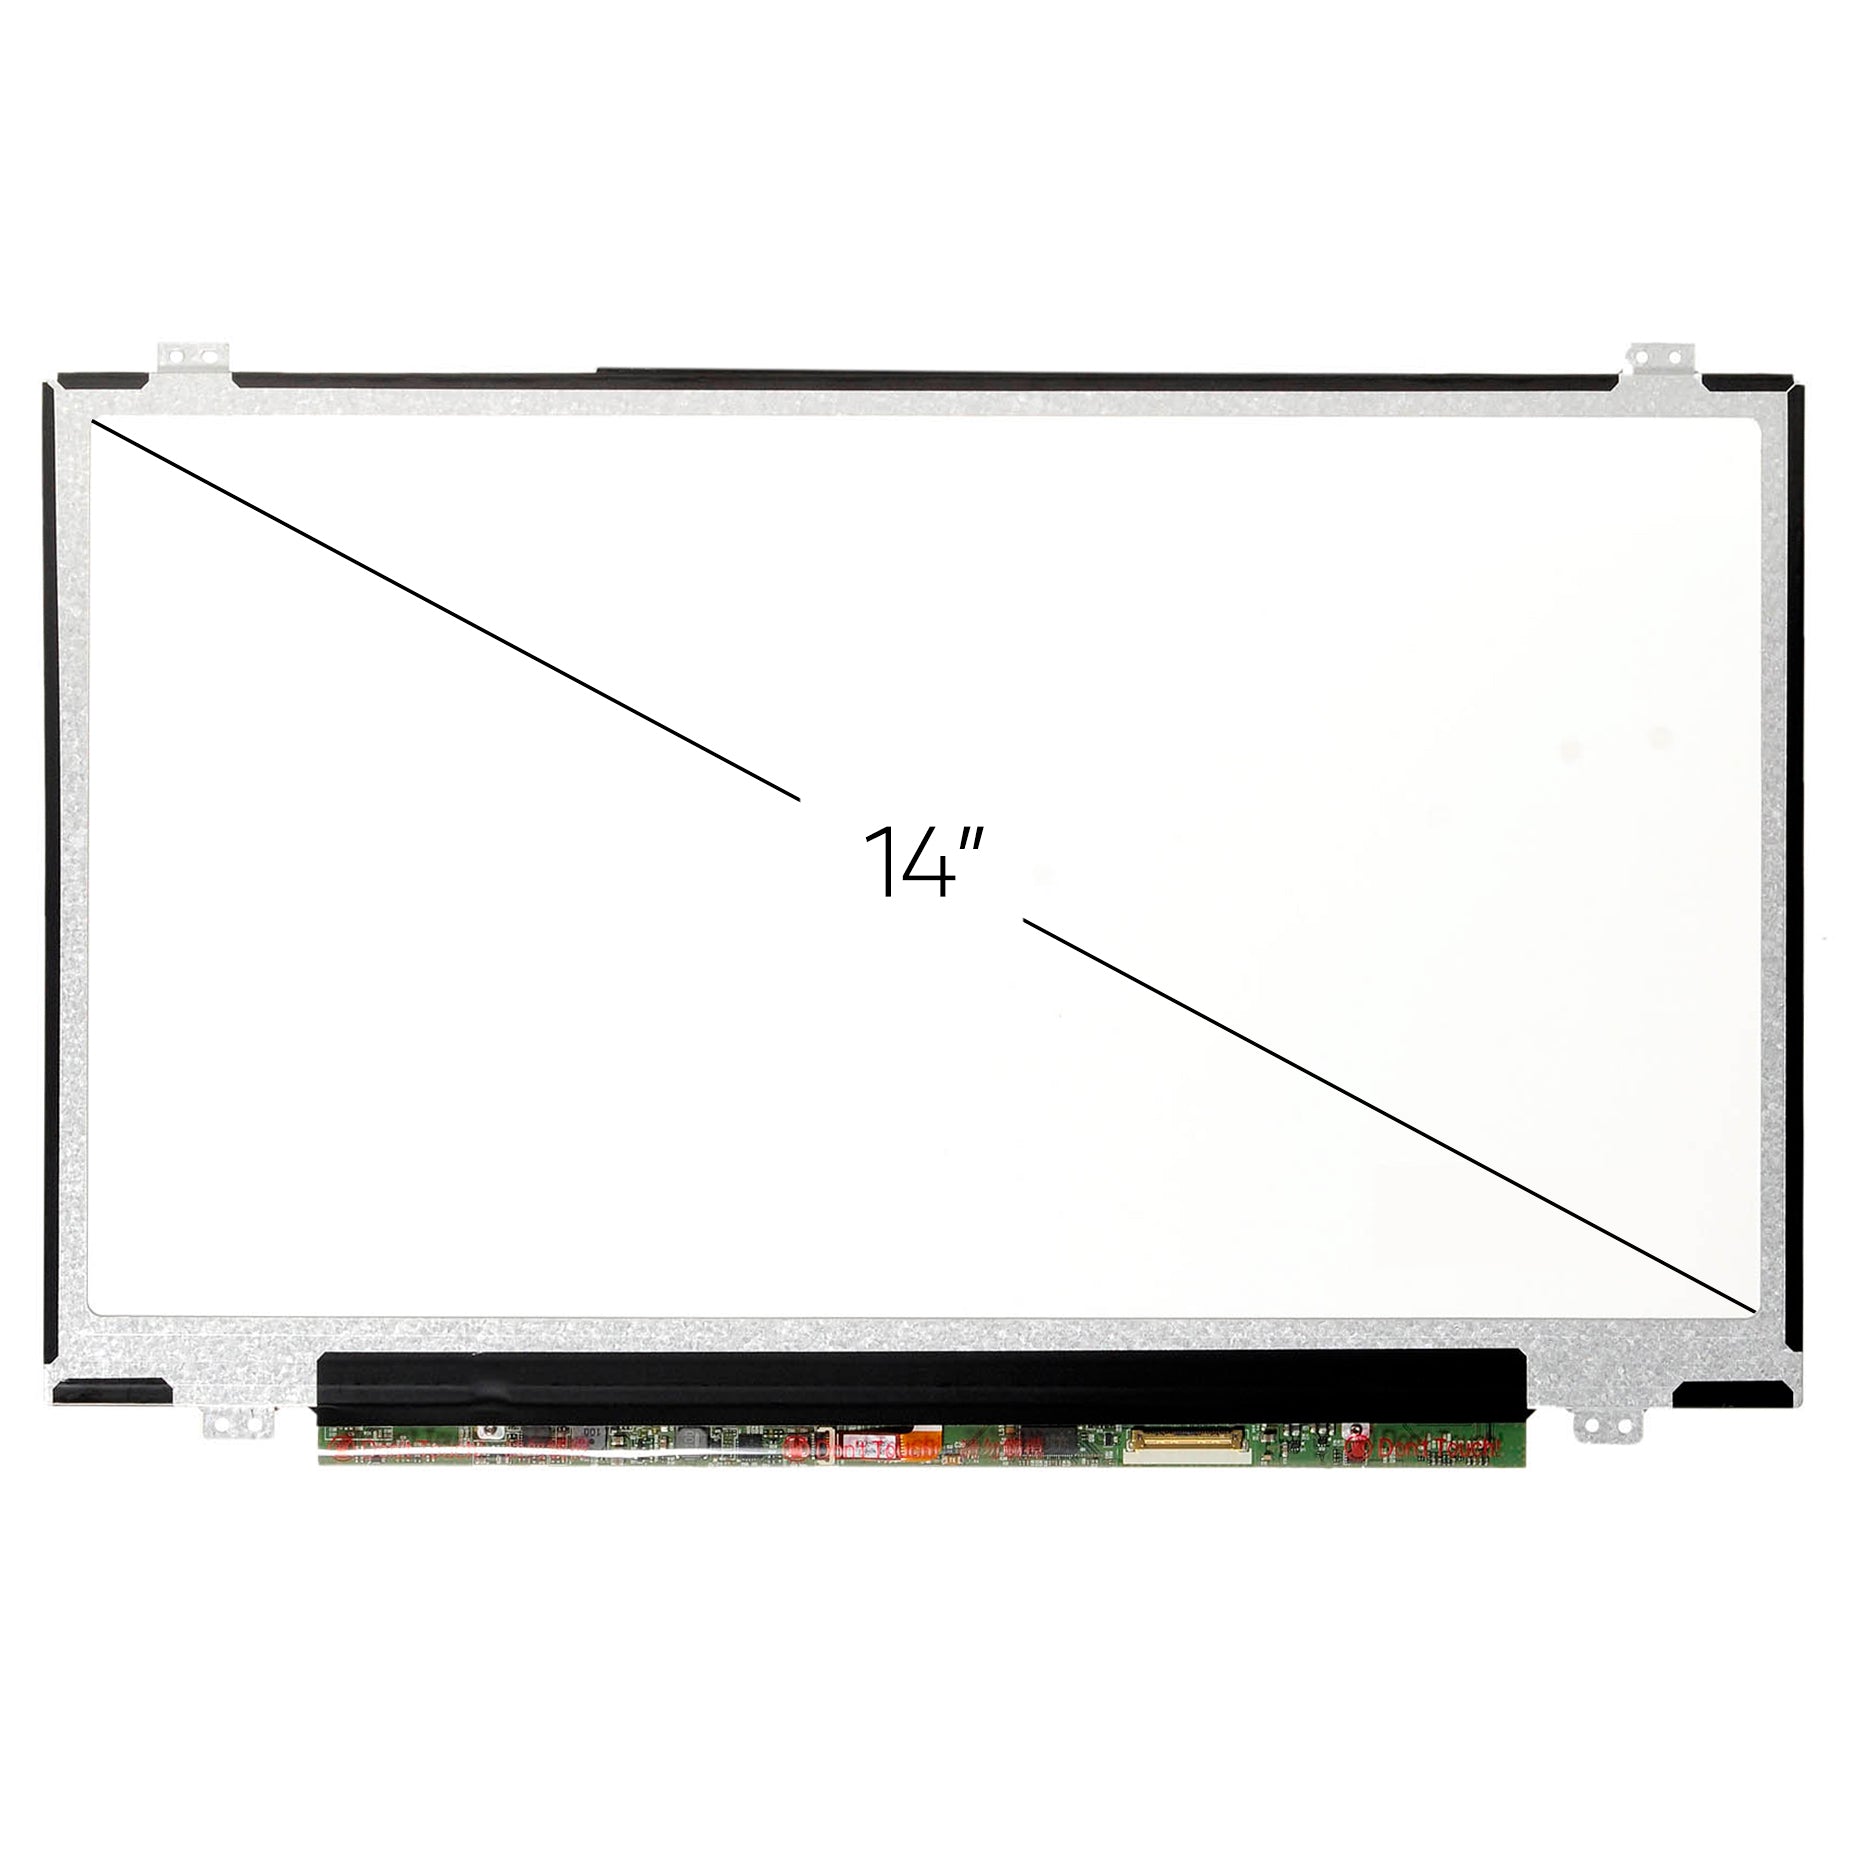 Screen Replacement for Lenovo Thinkpad T440P FHD 1920x1080 IPS Matte LCD LED Display